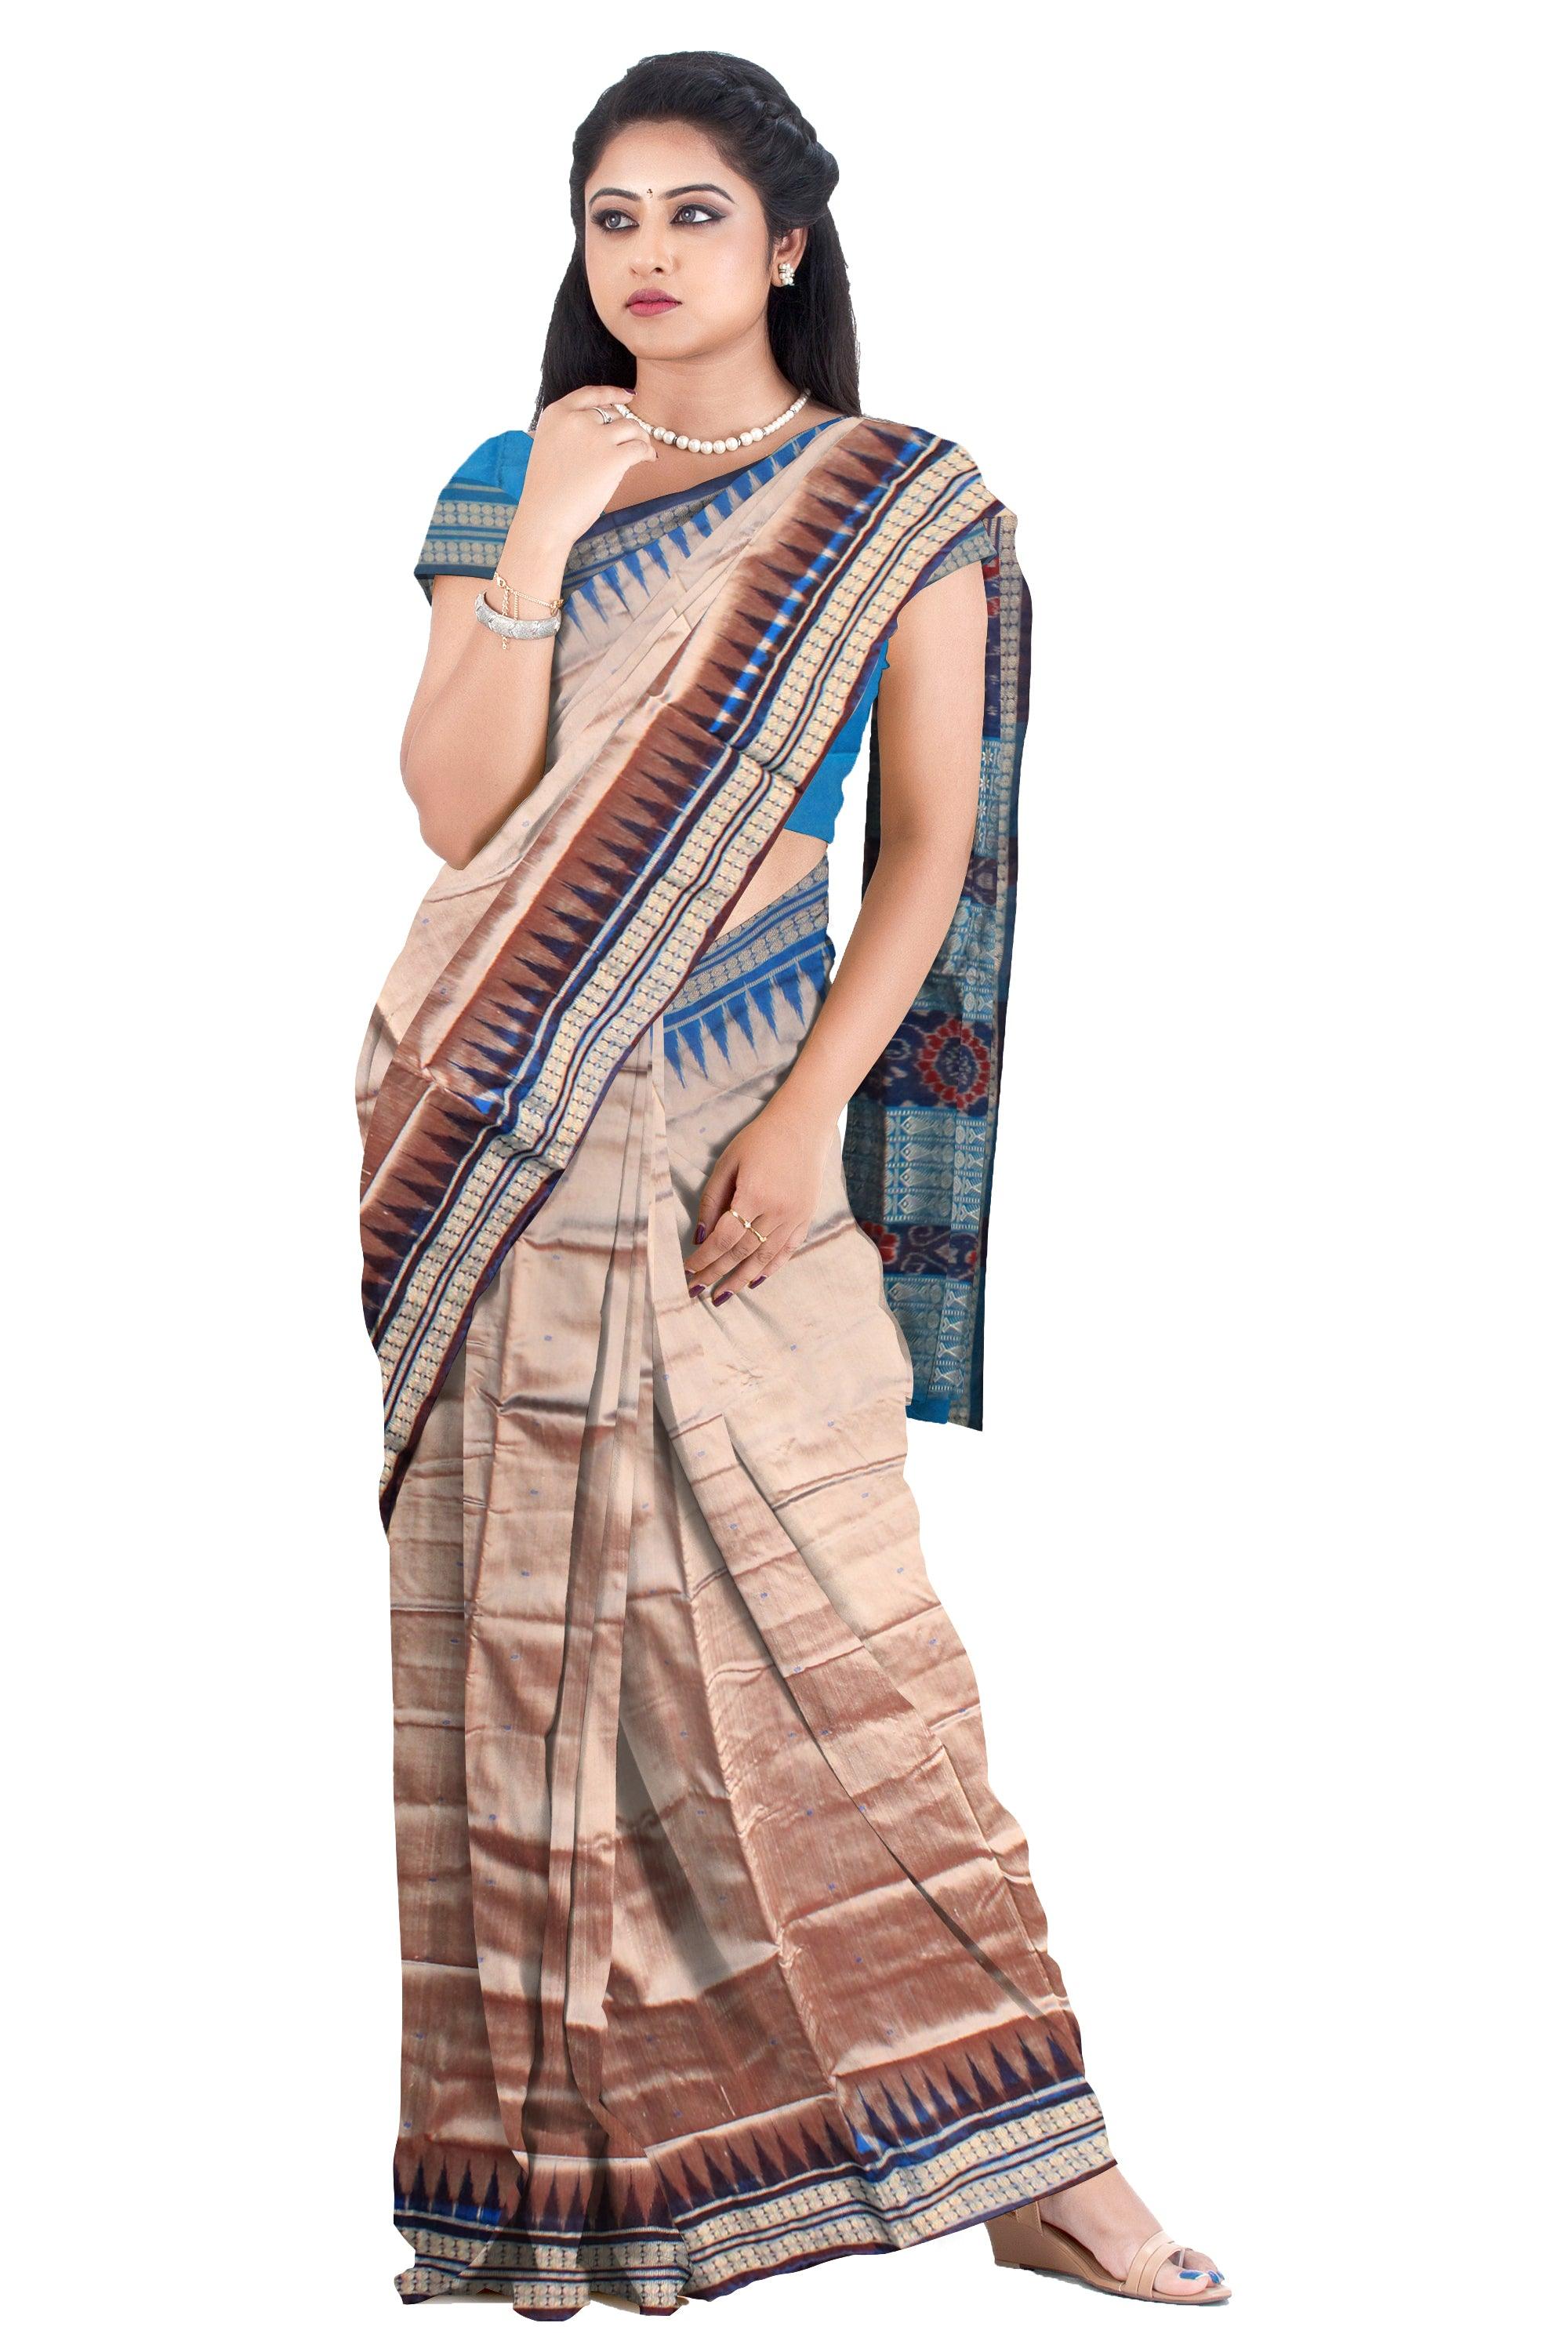 EXCLUSIVE SAMBALPURI PATA SAREE IN SILVER AND SKY BLUE  COLOR BODY IN (WITH BLOUSE PIECE) - Koshali Arts & Crafts Enterprise